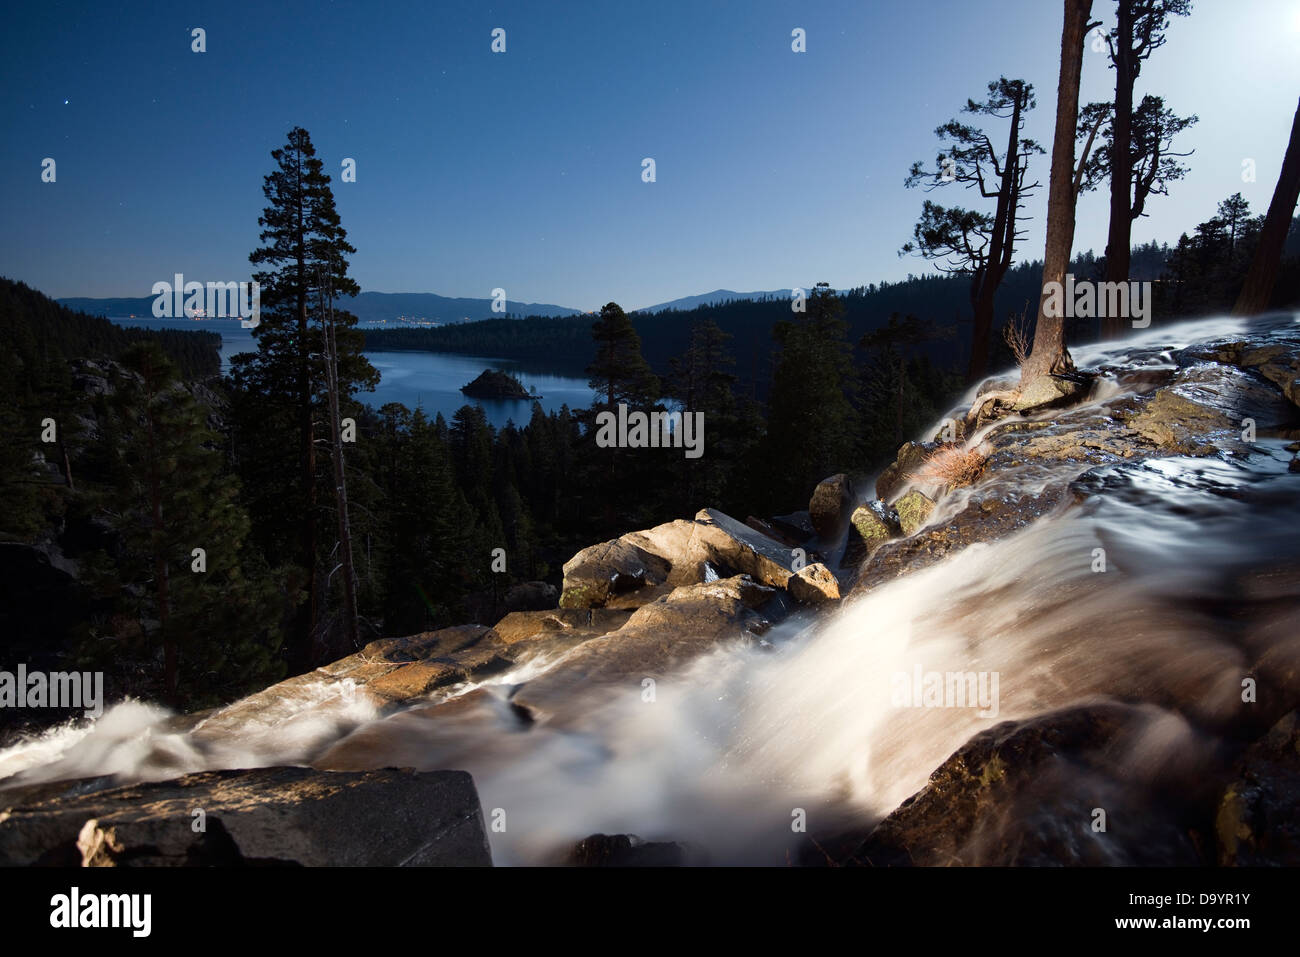 Eagle Falls is illuminated at night with Emerald Bay and Lake Tahoe in the background in Lake Tahoe, CA. Stock Photo